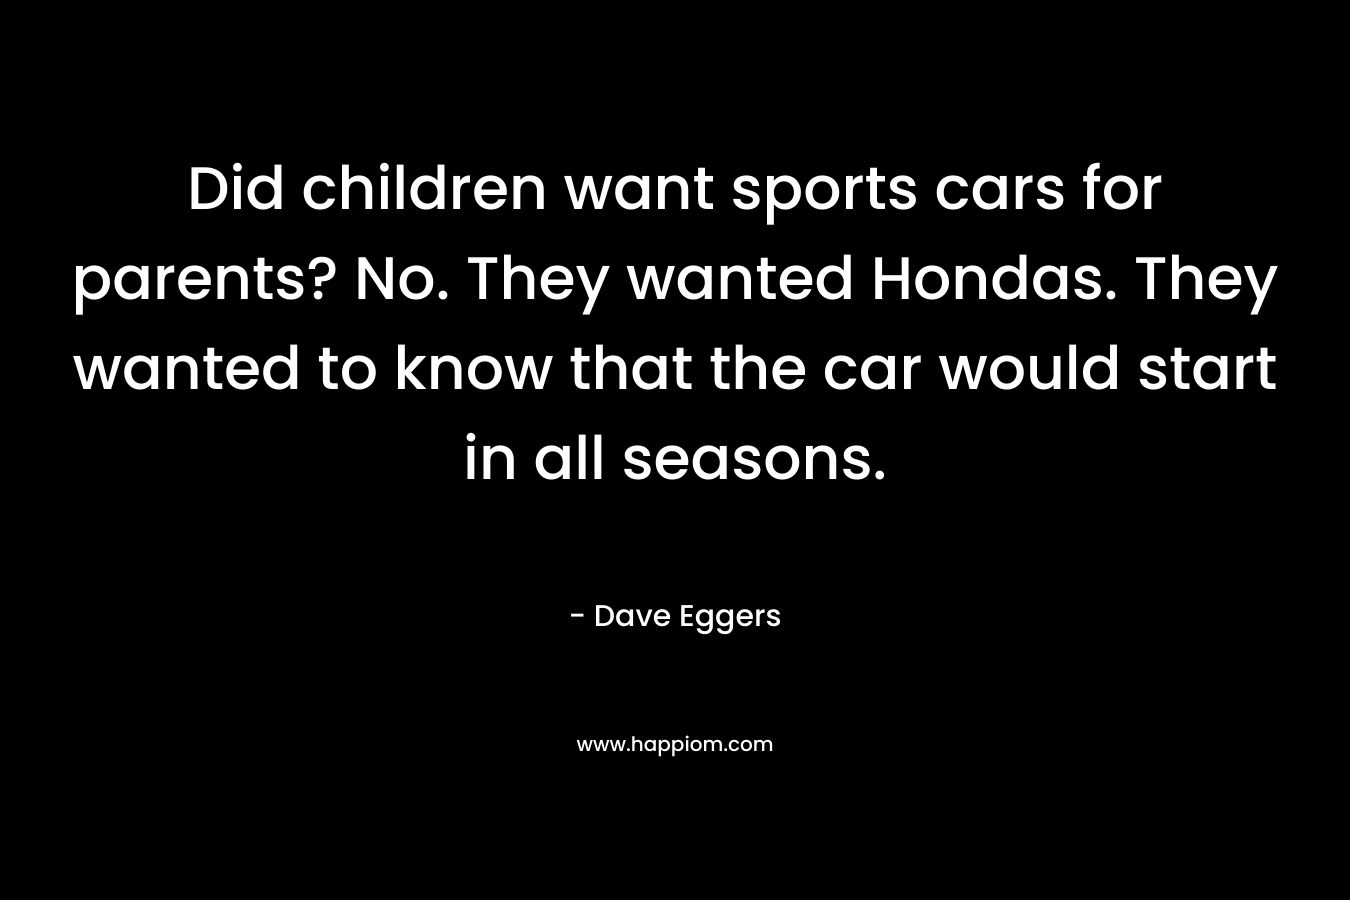 Did children want sports cars for parents? No. They wanted Hondas. They wanted to know that the car would start in all seasons. – Dave Eggers